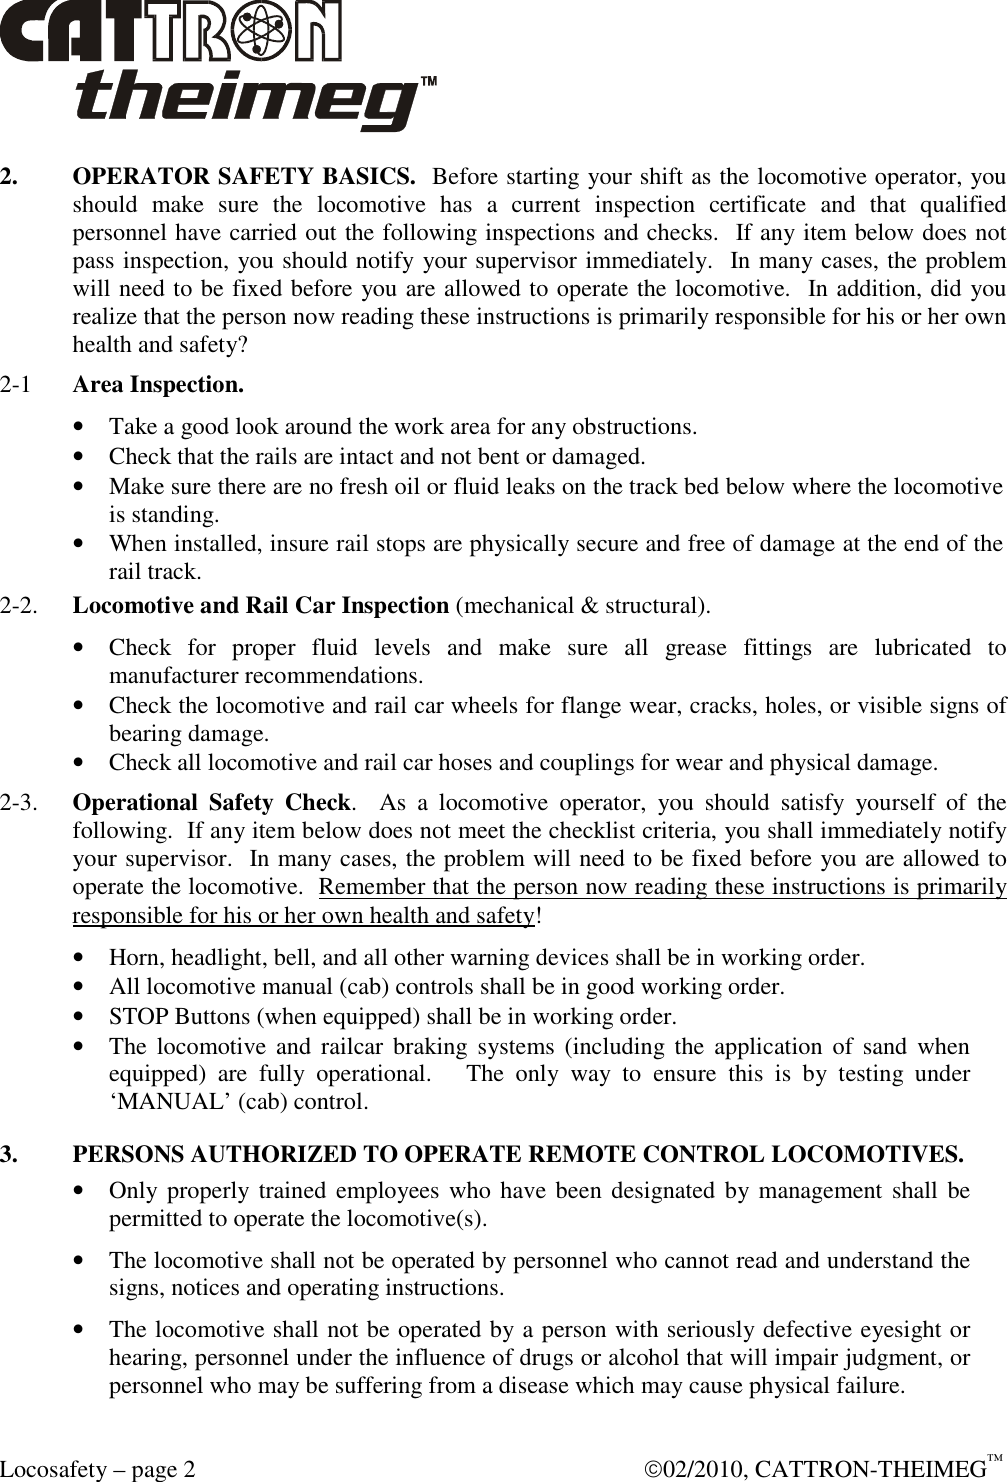  Locosafety – page 2    02/2010, CATTRON-THEIMEG™ 2.  OPERATOR SAFETY BASICS.  Before starting your shift as the locomotive operator, you should  make  sure  the  locomotive  has  a  current  inspection  certificate  and  that  qualified personnel have carried out the following inspections and checks.  If any item below does not pass inspection, you should notify your supervisor immediately.  In many cases, the problem will need to be fixed before you are allowed to operate the locomotive.  In addition, did you realize that the person now reading these instructions is primarily responsible for his or her own health and safety? 2-1   Area Inspection.  • Take a good look around the work area for any obstructions. • Check that the rails are intact and not bent or damaged.  • Make sure there are no fresh oil or fluid leaks on the track bed below where the locomotive is standing. • When installed, insure rail stops are physically secure and free of damage at the end of the rail track.  2-2.  Locomotive and Rail Car Inspection (mechanical &amp; structural). • Check  for  proper  fluid  levels  and  make  sure  all  grease  fittings  are  lubricated  to manufacturer recommendations.  • Check the locomotive and rail car wheels for flange wear, cracks, holes, or visible signs of bearing damage. • Check all locomotive and rail car hoses and couplings for wear and physical damage.  2-3.  Operational  Safety  Check.    As  a  locomotive  operator,  you  should  satisfy  yourself  of  the following.  If any item below does not meet the checklist criteria, you shall immediately notify your supervisor.  In many cases, the problem will need to be fixed before you are allowed to operate the locomotive.  Remember that the person now reading these instructions is primarily responsible for his or her own health and safety! • Horn, headlight, bell, and all other warning devices shall be in working order. • All locomotive manual (cab) controls shall be in good working order. • STOP Buttons (when equipped) shall be in working order.  • The  locomotive  and  railcar  braking  systems (including the  application  of  sand  when equipped)  are  fully  operational.      The  only  way  to  ensure  this  is  by  testing  under ‘MANUAL’ (cab) control. 3.  PERSONS AUTHORIZED TO OPERATE REMOTE CONTROL LOCOMOTIVES. • Only properly trained  employees who have been designated by management shall  be permitted to operate the locomotive(s). • The locomotive shall not be operated by personnel who cannot read and understand the signs, notices and operating instructions. • The locomotive shall not be operated by a person with seriously defective eyesight or hearing, personnel under the influence of drugs or alcohol that will impair judgment, or personnel who may be suffering from a disease which may cause physical failure. 